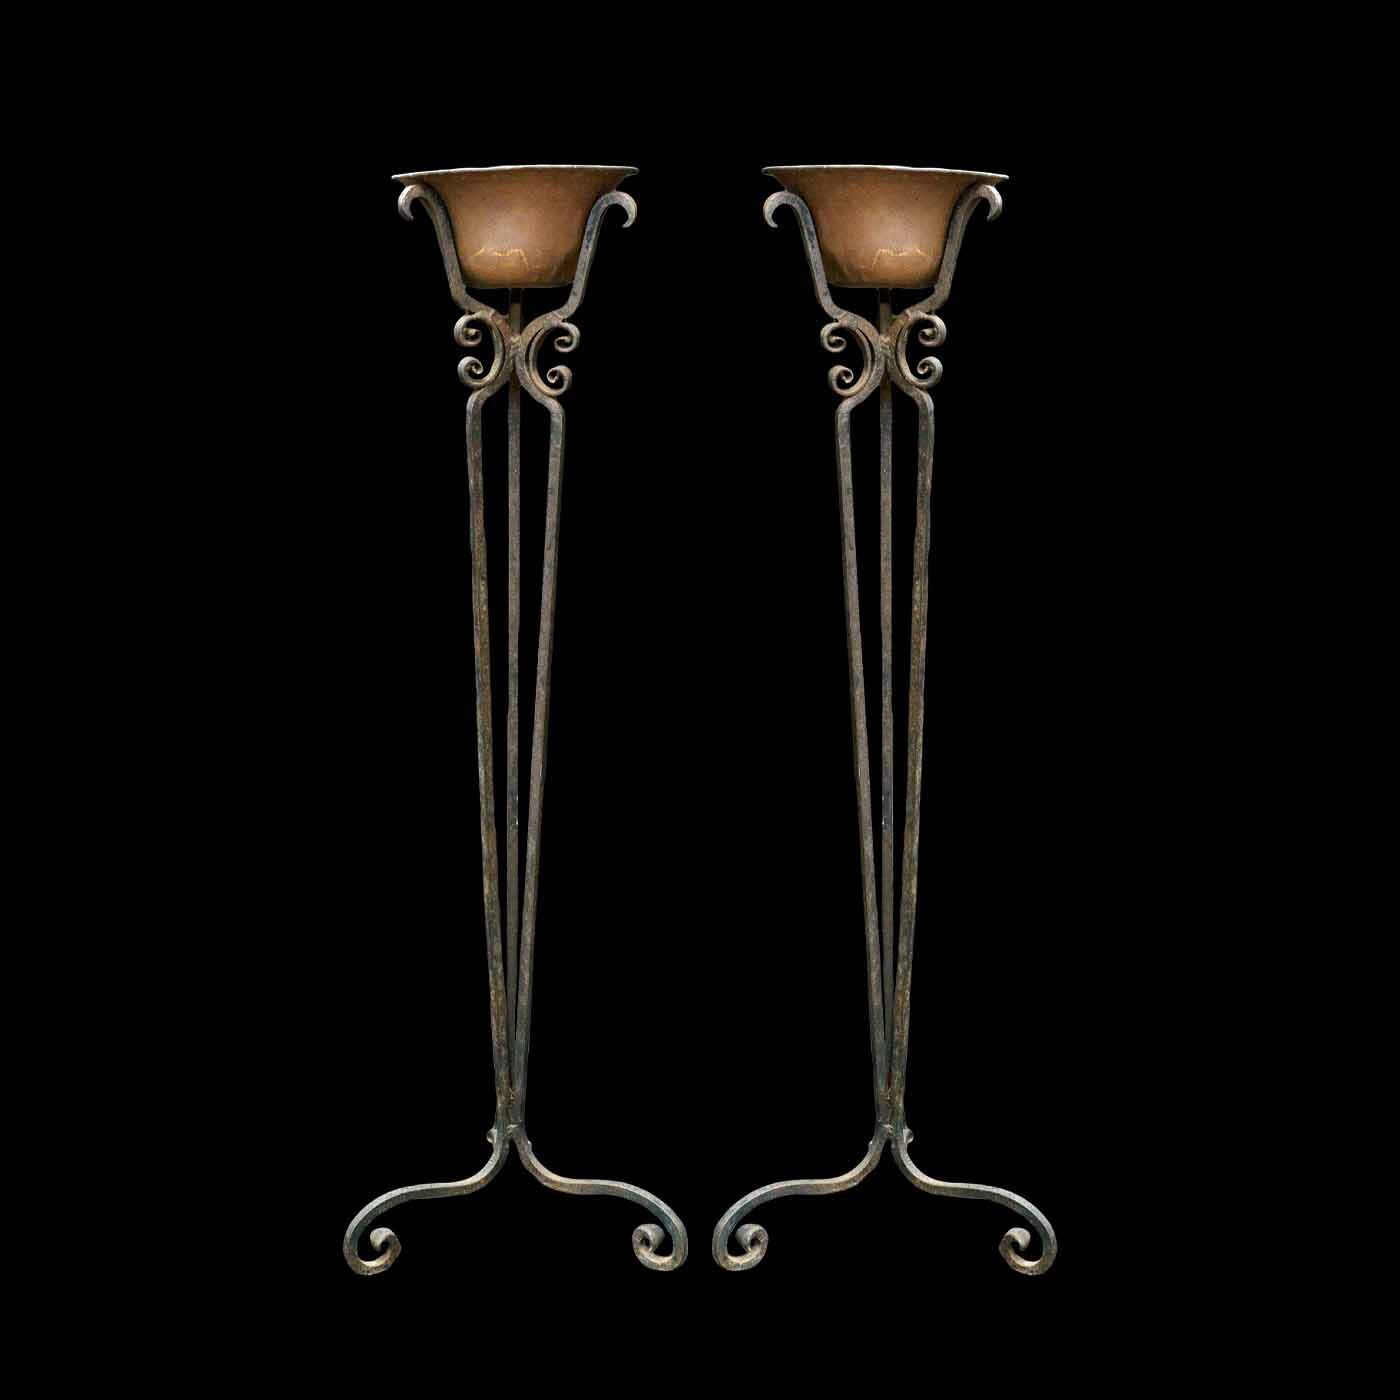 Torchiere Plant Stands Copper Inserts on Wrought Iron